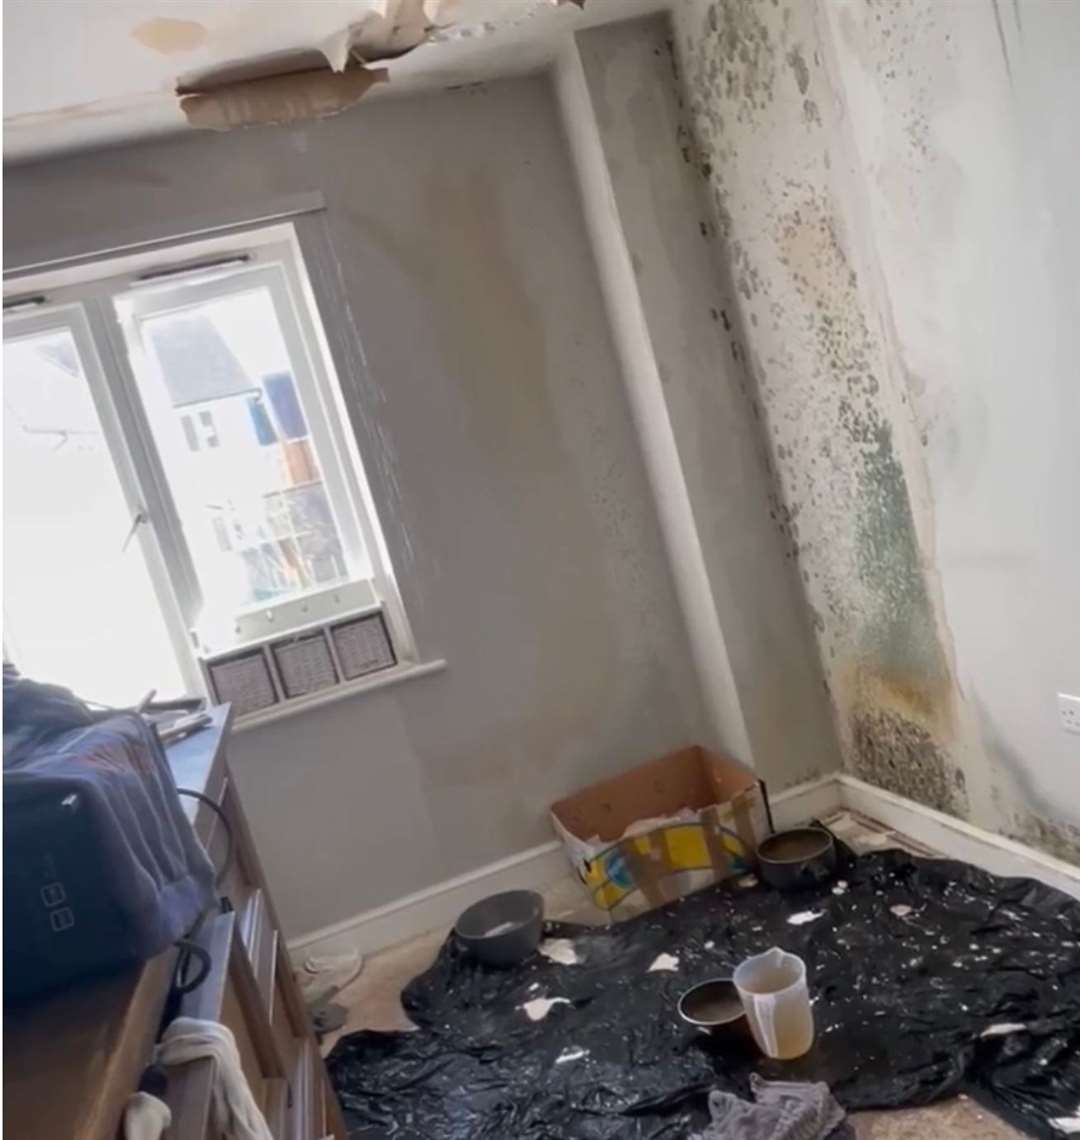 Bethany Harman says her whole flat smells of damp. Picture: Bethany Harman